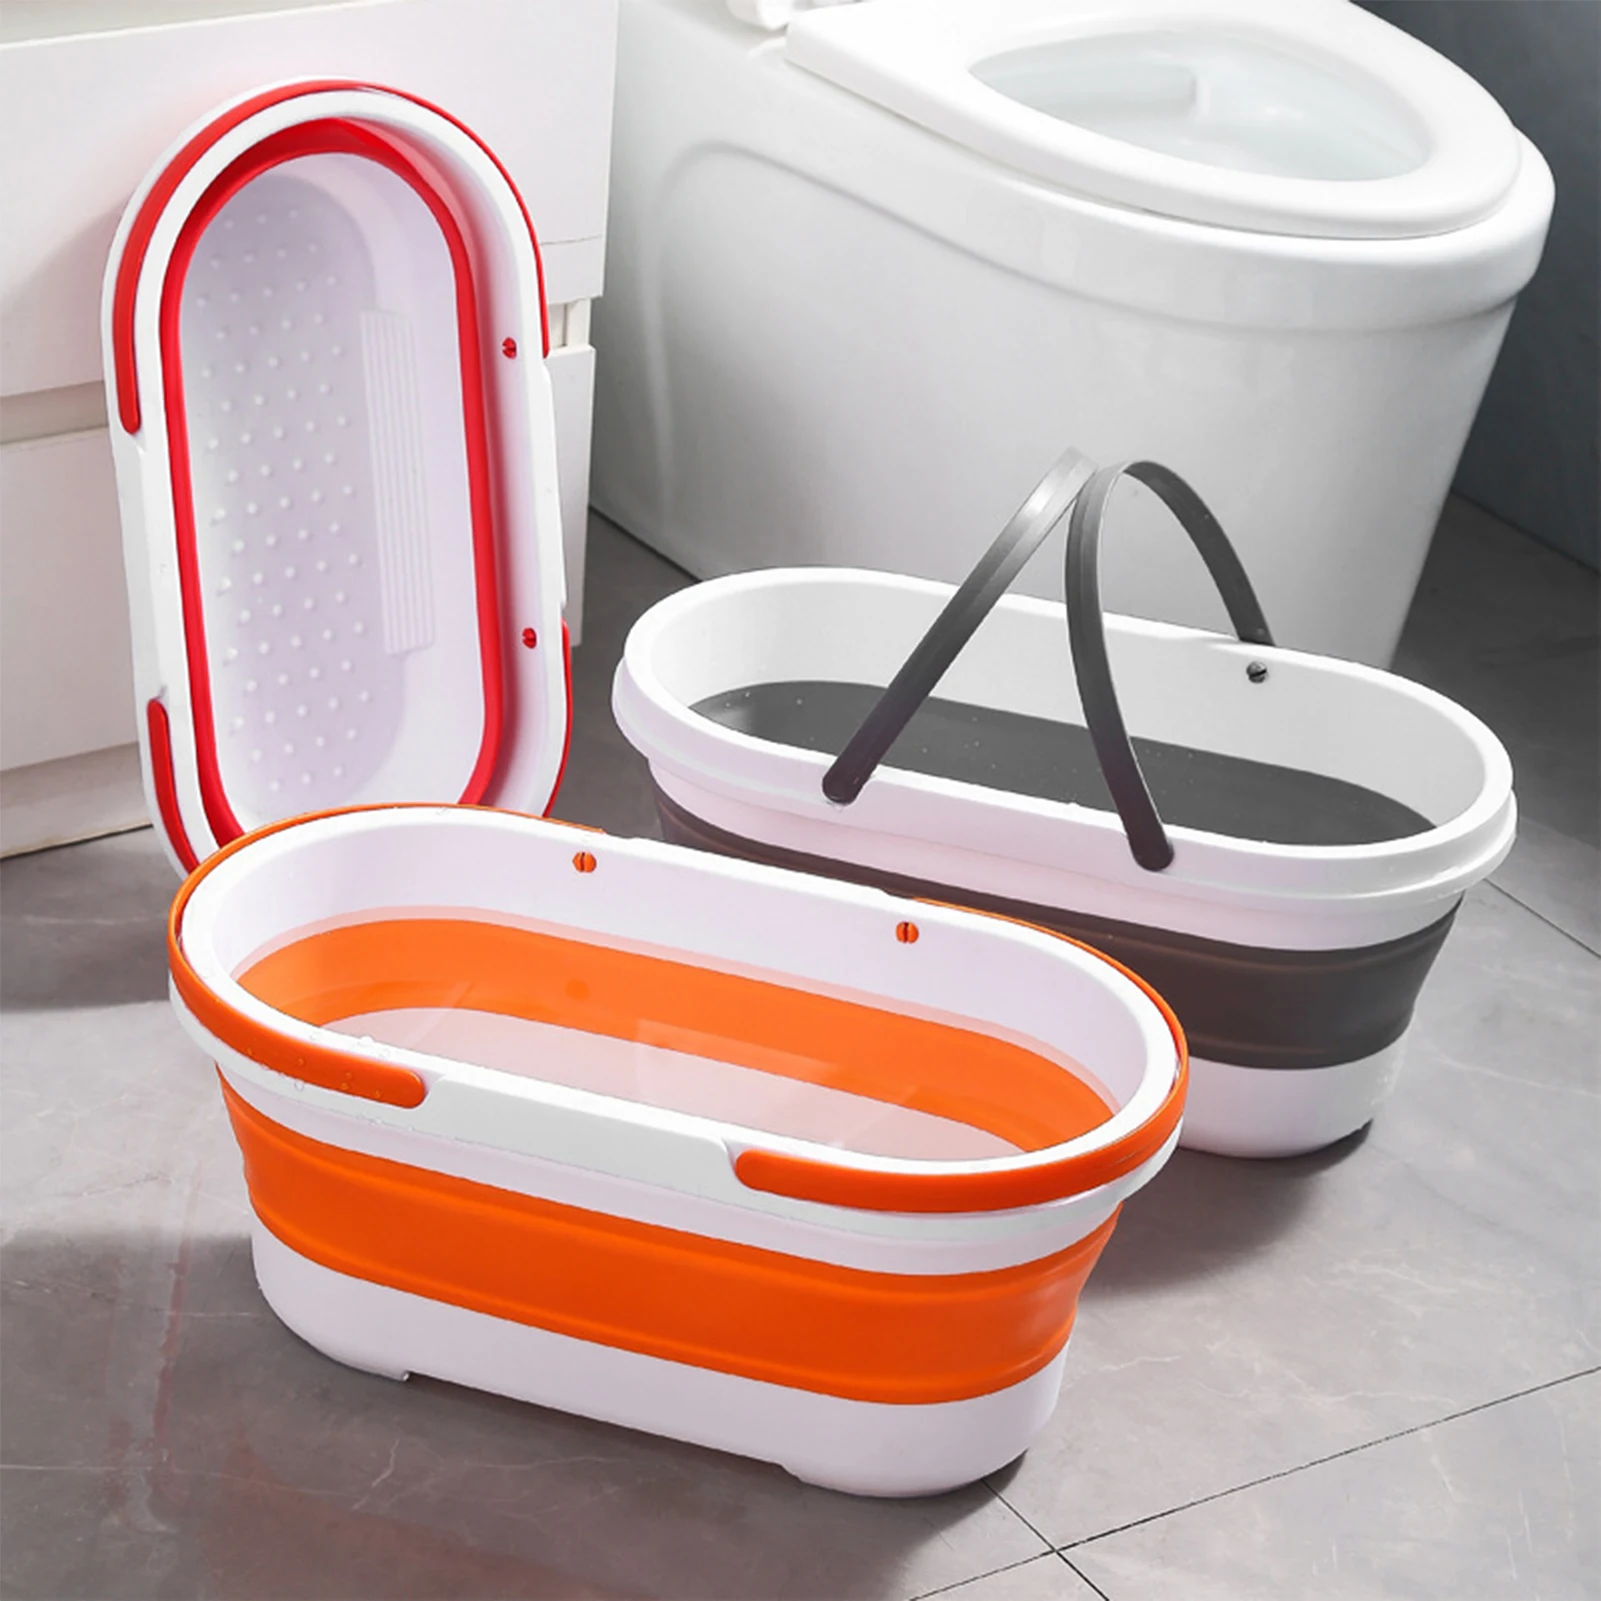 

Effective Fishing Wash Basin Mop Portable With Collapsible Bucket Barrel Tools Handle Pail Foldable Large-capacity Dishpan